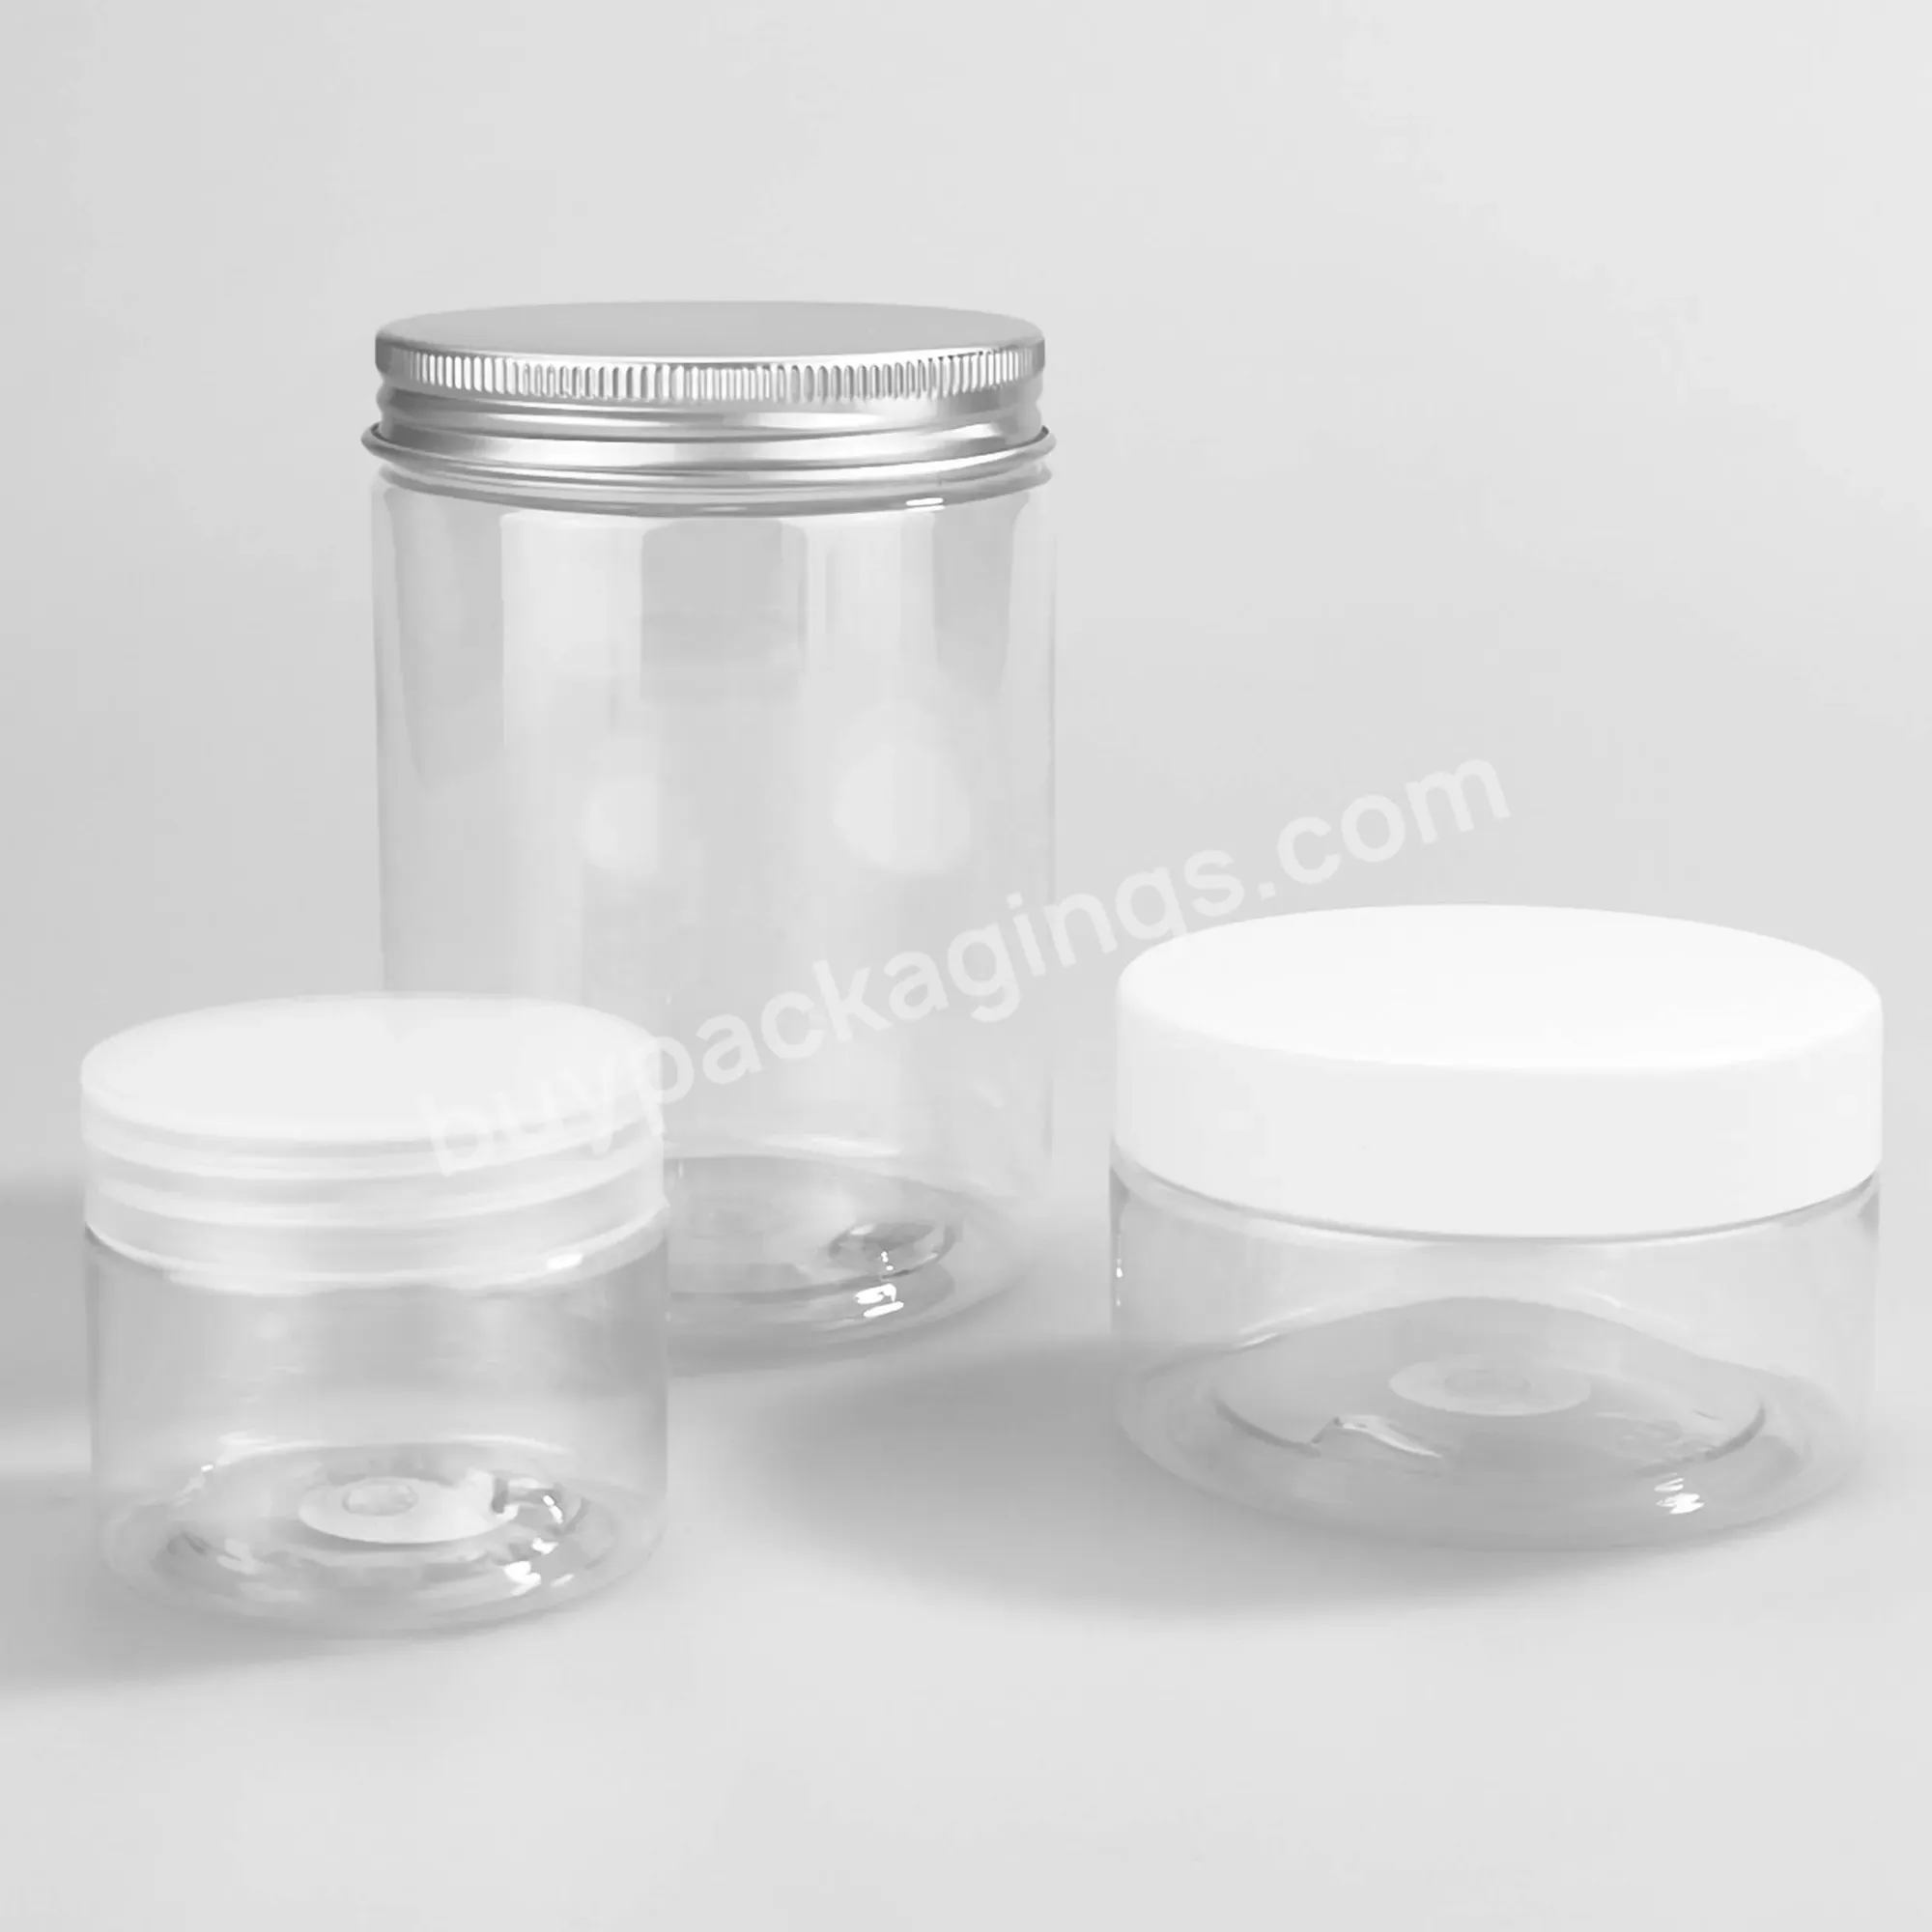 Elegant Cosmetic Container Lotion 50ml 100ml Clear Scrub Body Butter Pet Plastic Cream Jar With Lid - Buy Customized 50ml 100ml 150ml 200ml 250ml 300ml 400ml 500ml Empty Cosmetic Butter Scrub Cream Container Cosmetic Packaging,Legant Cosmetic Contain